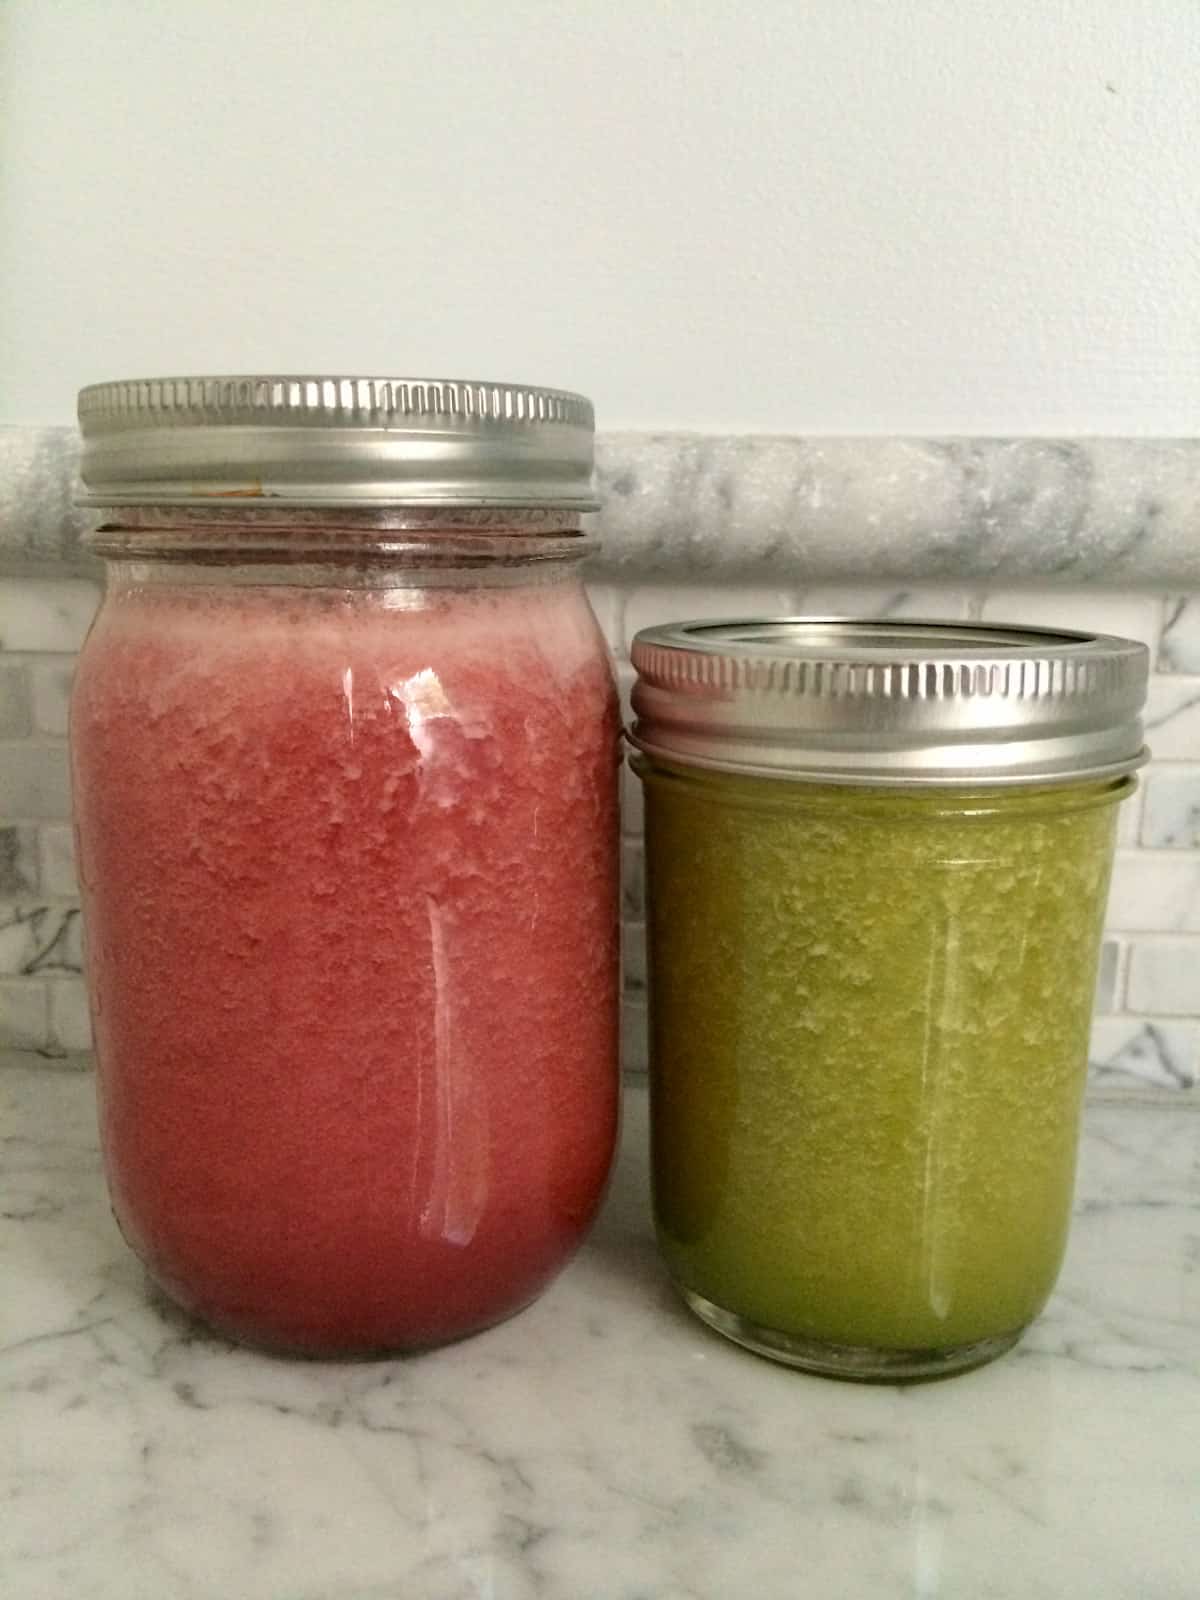 Two glass jars of juice, one red and one green.